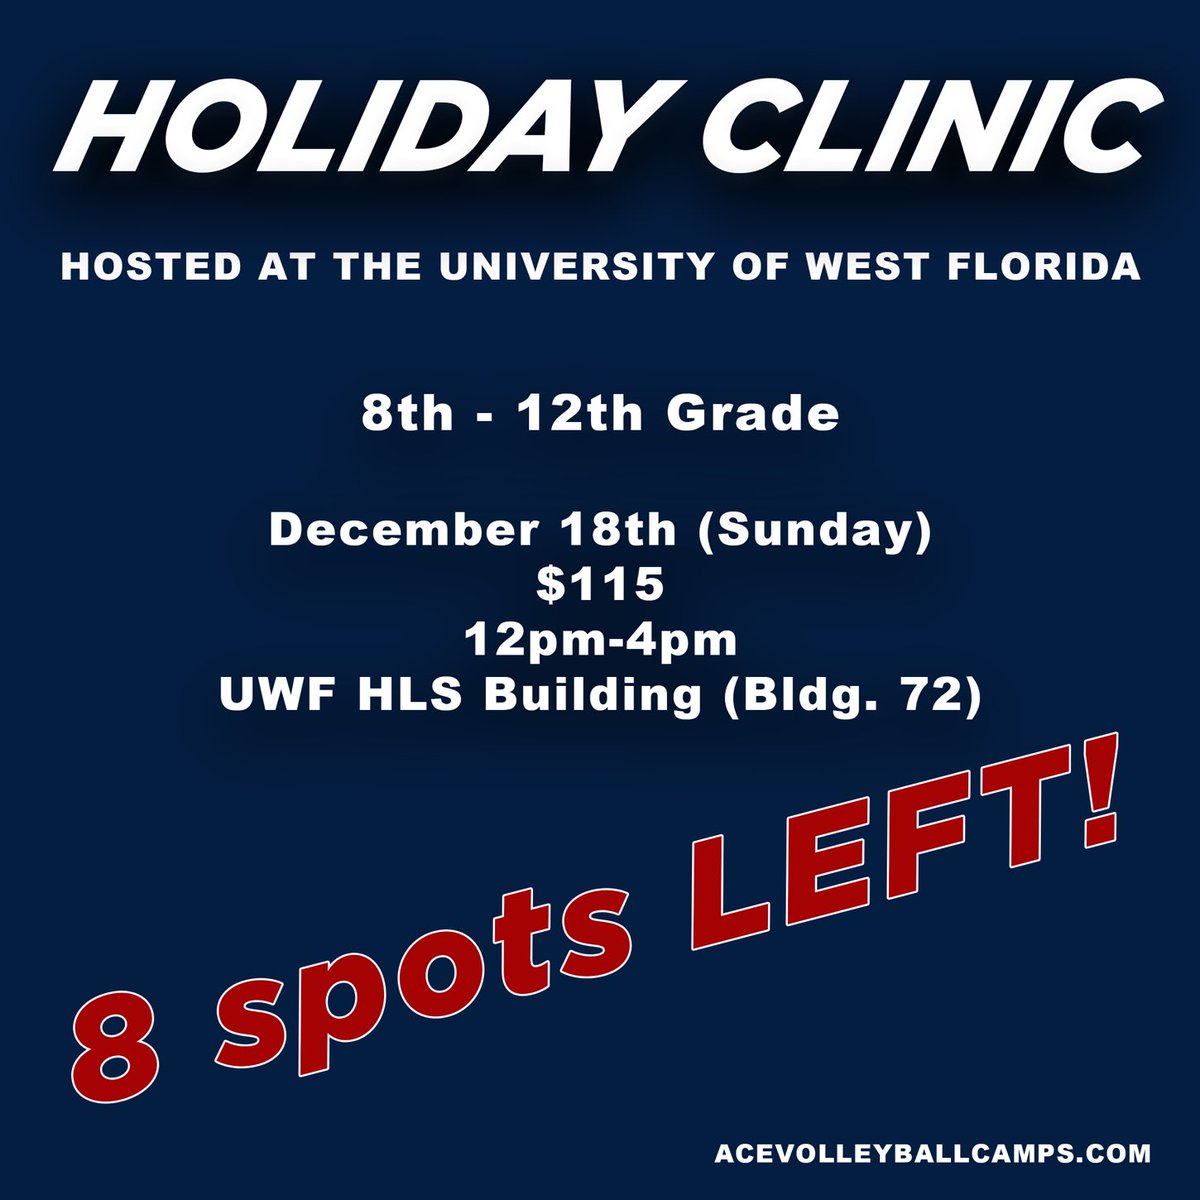 Getting down to the wire. Sign up today. You don’t want to miss out!!  Acevolleyballcamps.com #UWFVB